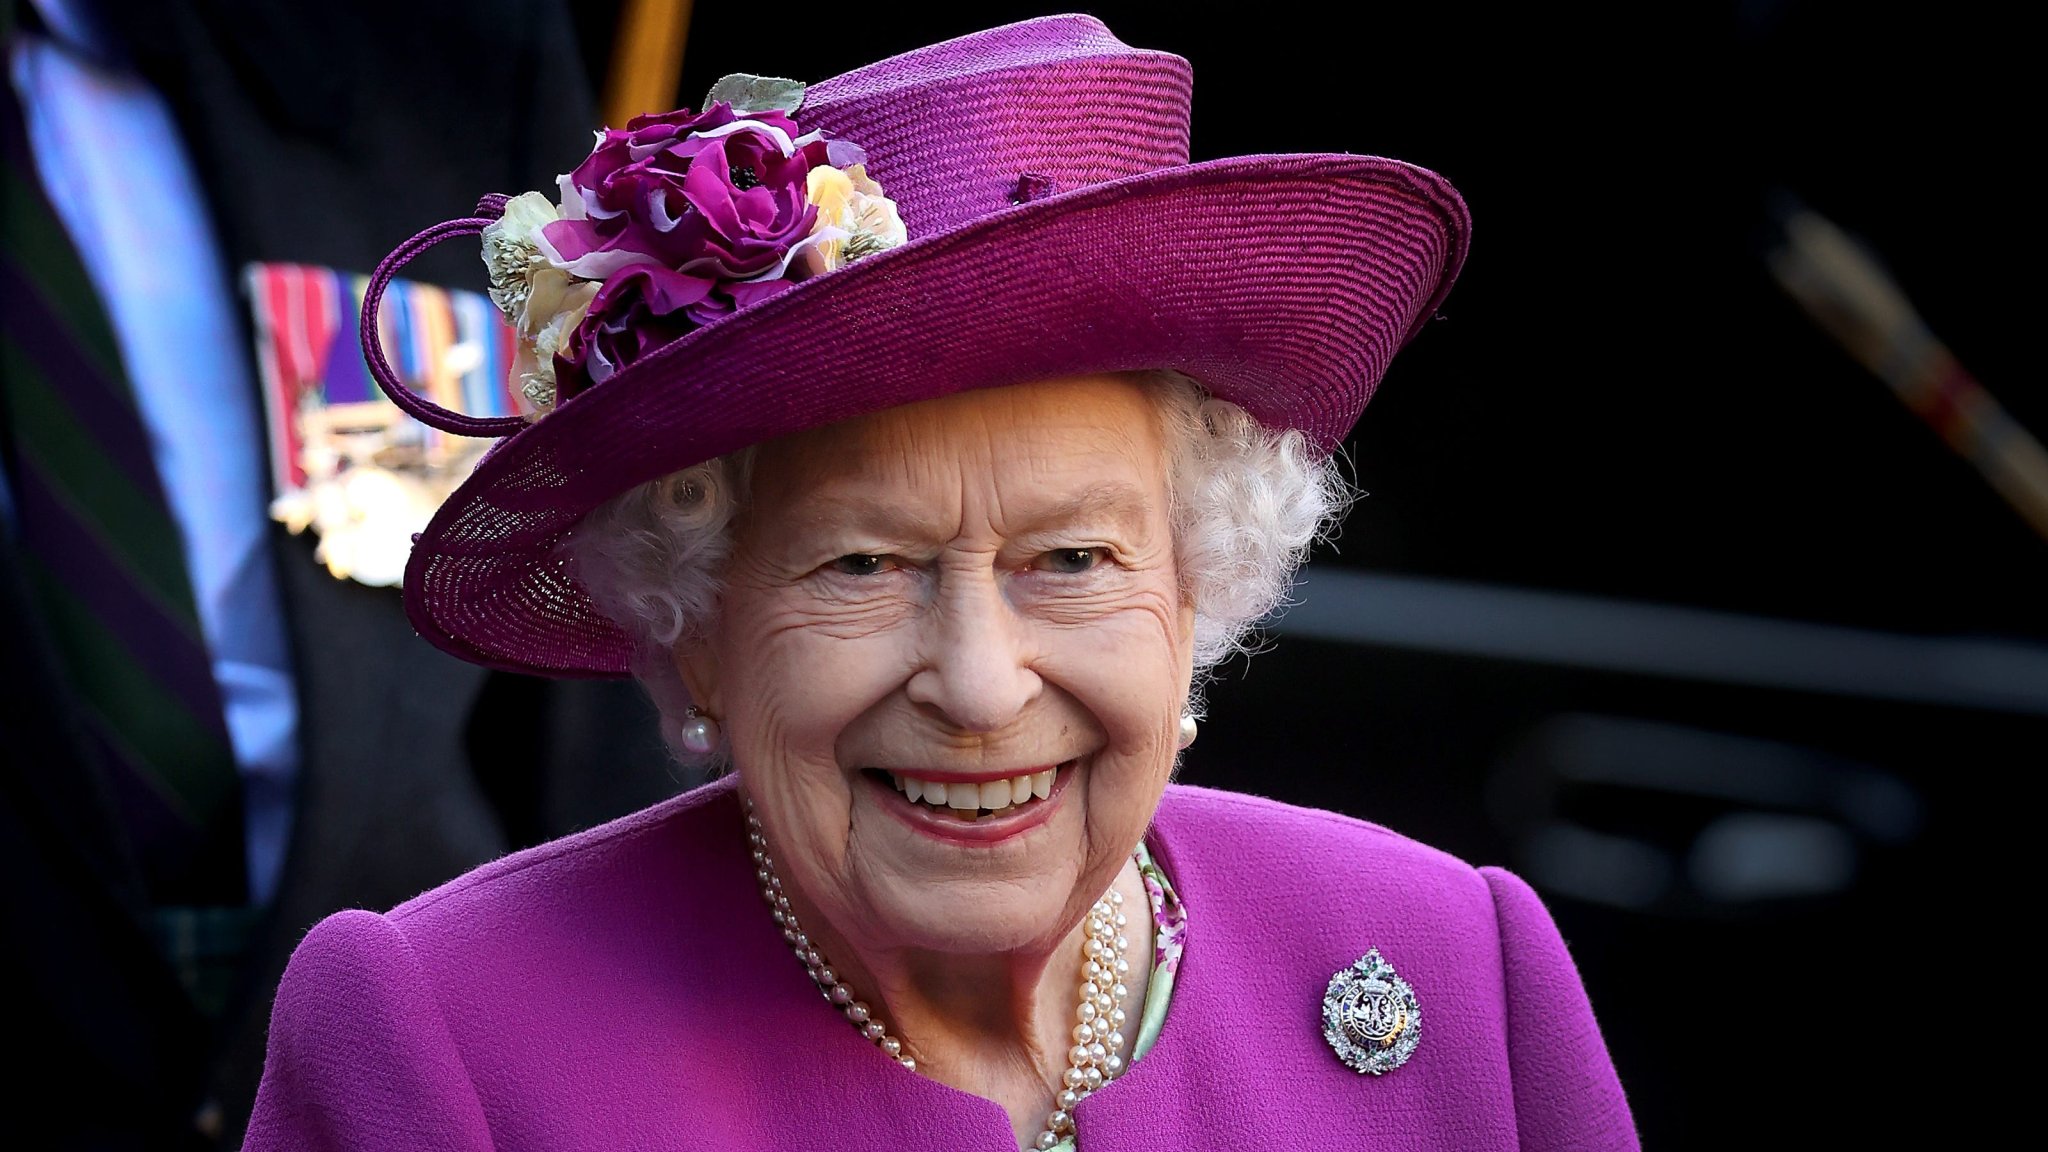 From funeral plans to processions, what happens now that Queen Elizabeth II has died?